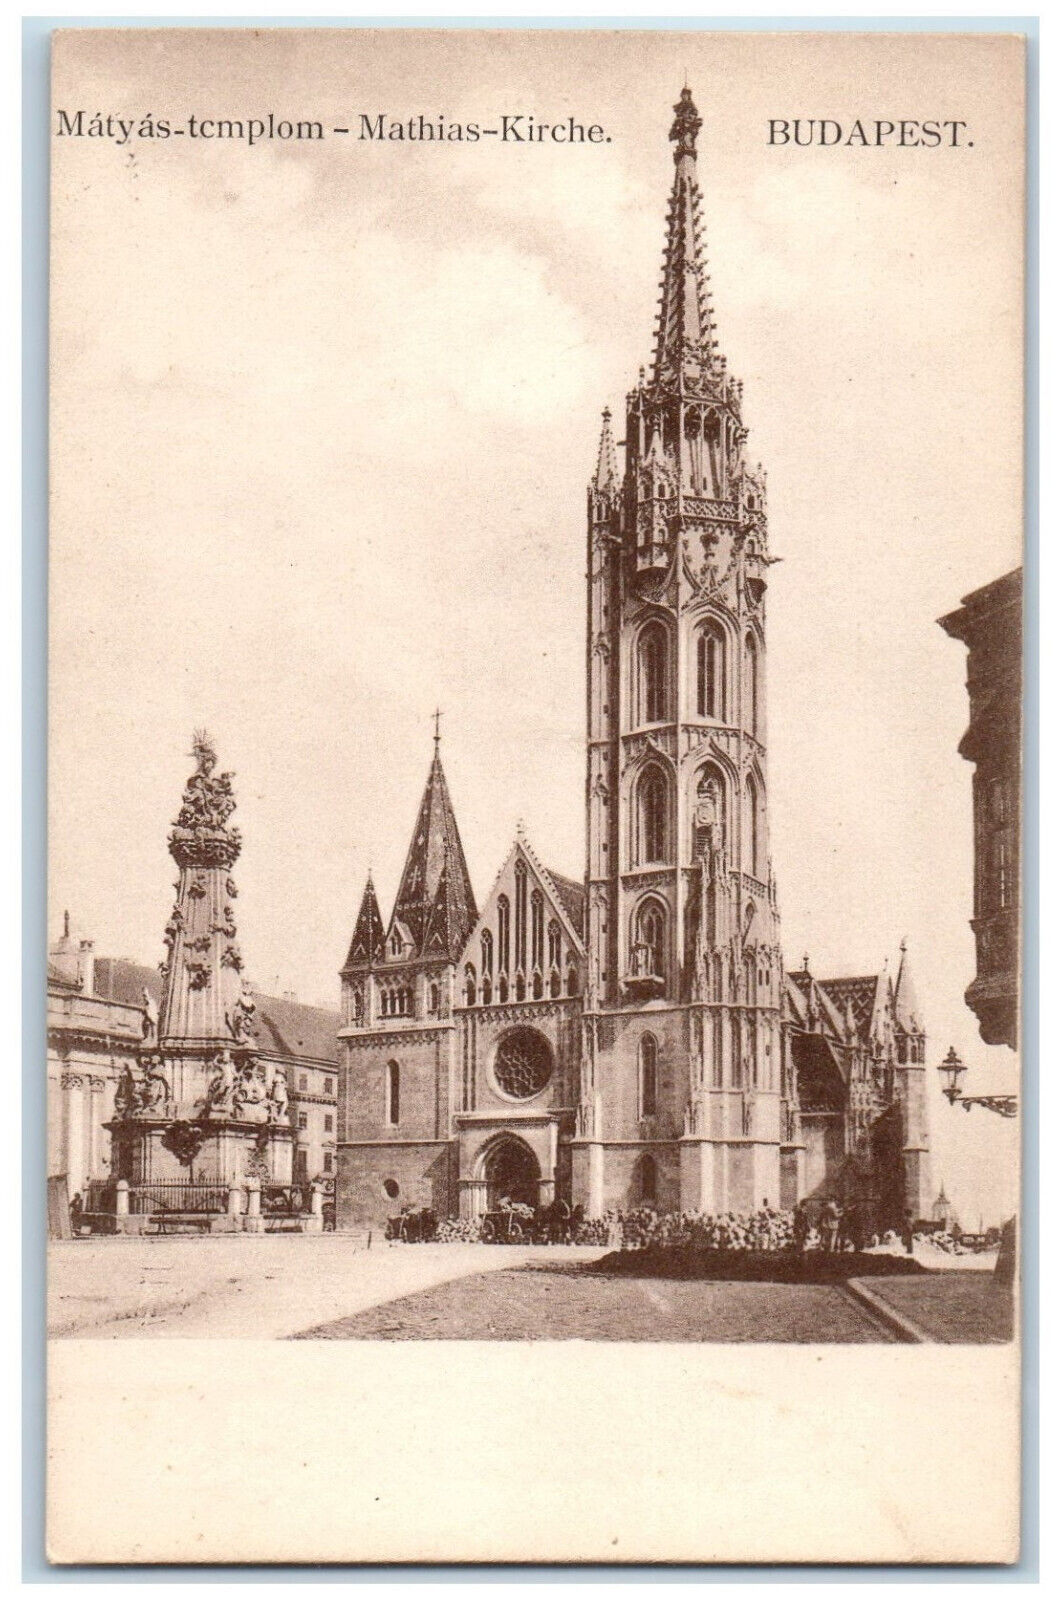 Budapest Hungary Postcard Entrance to Matthias Church c1905 Antique Unposted